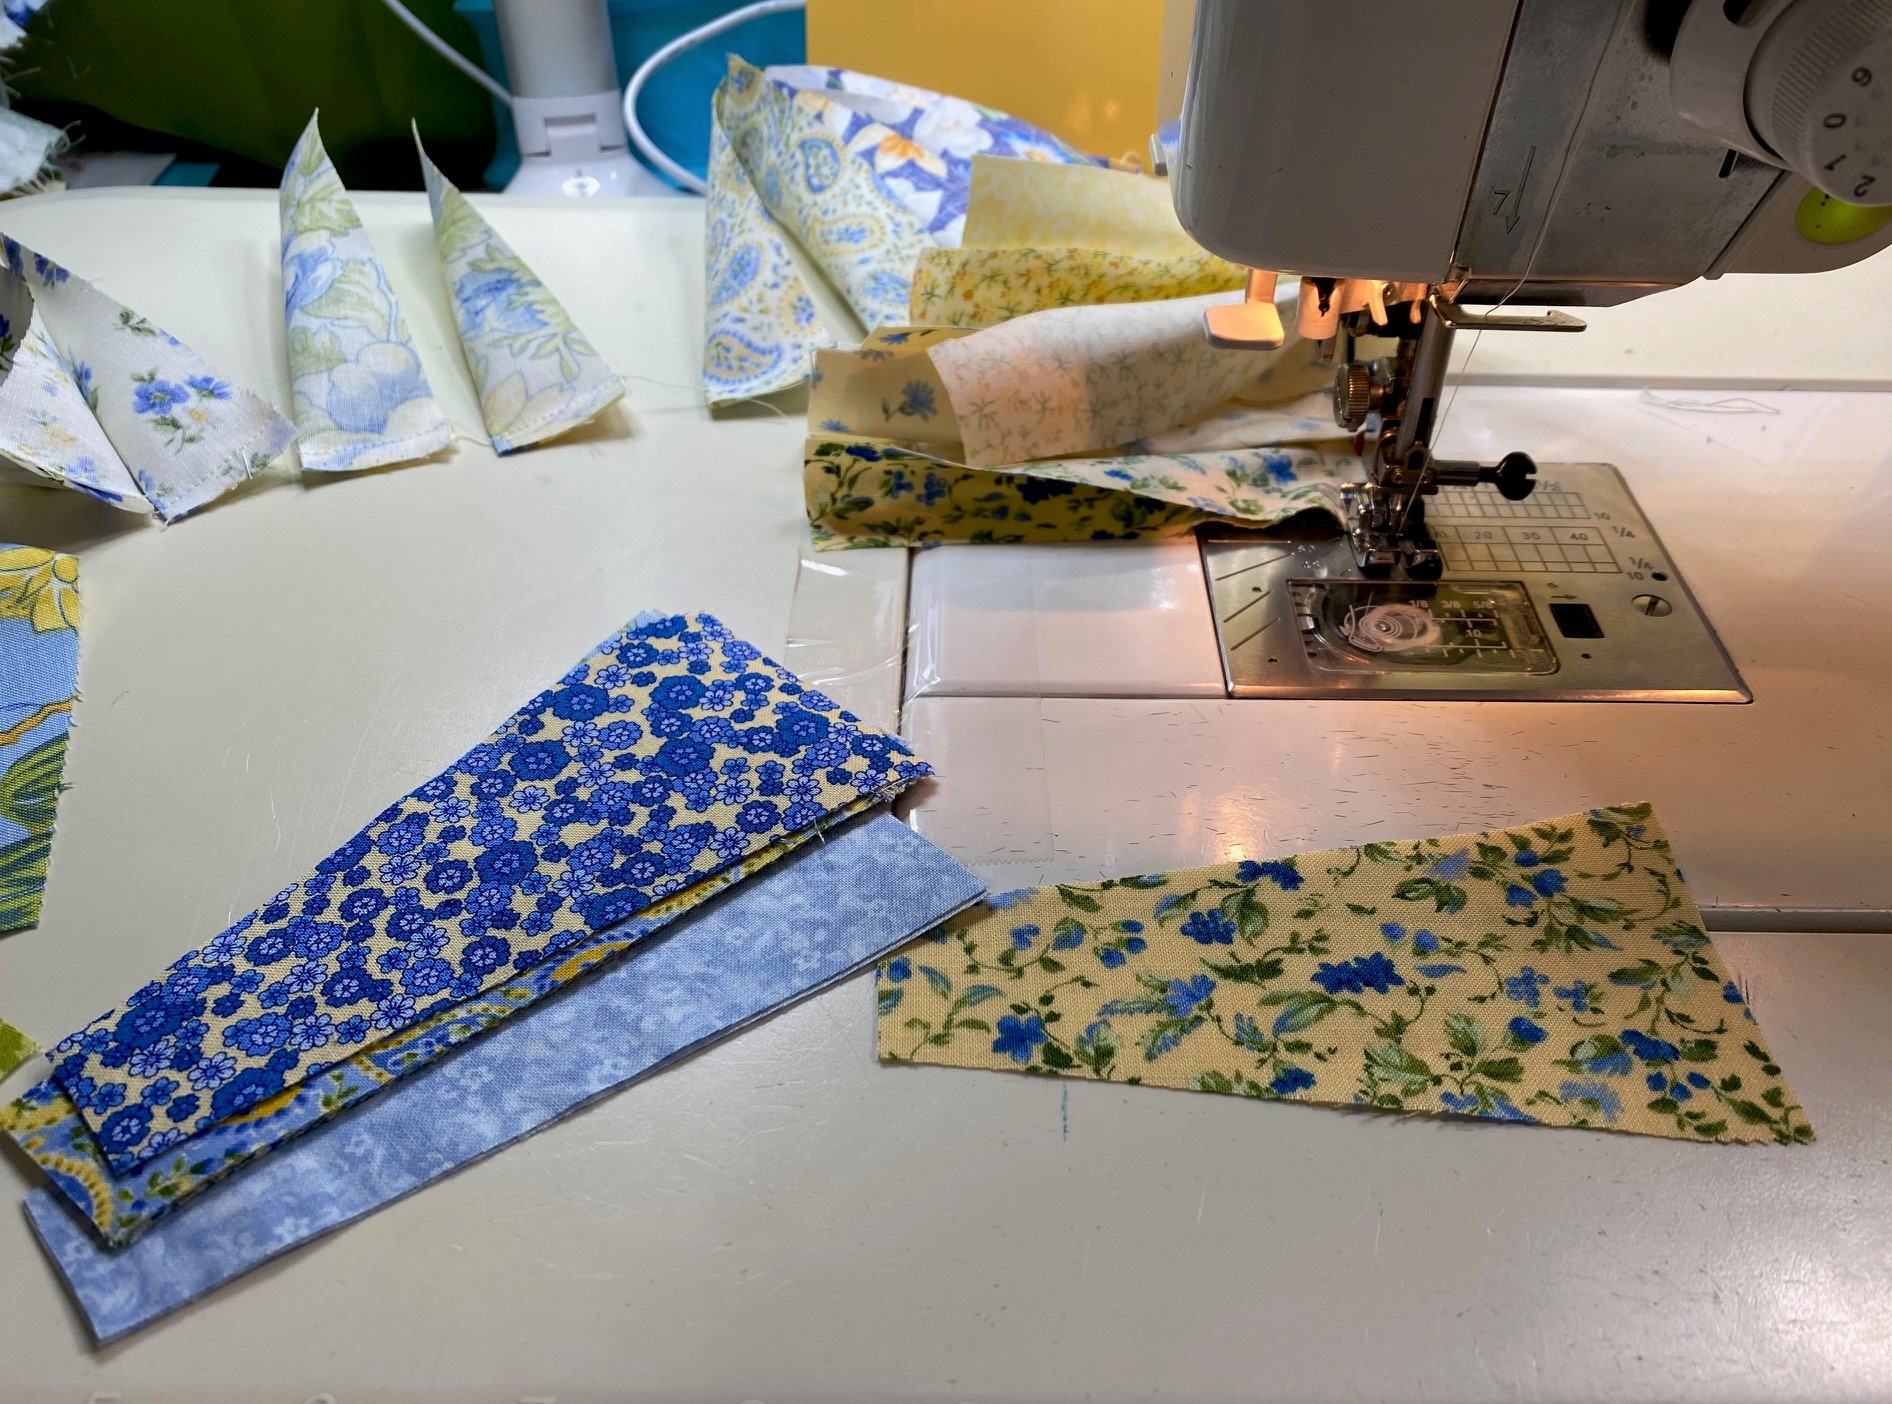 How to sew Dresden Plates - Gathered